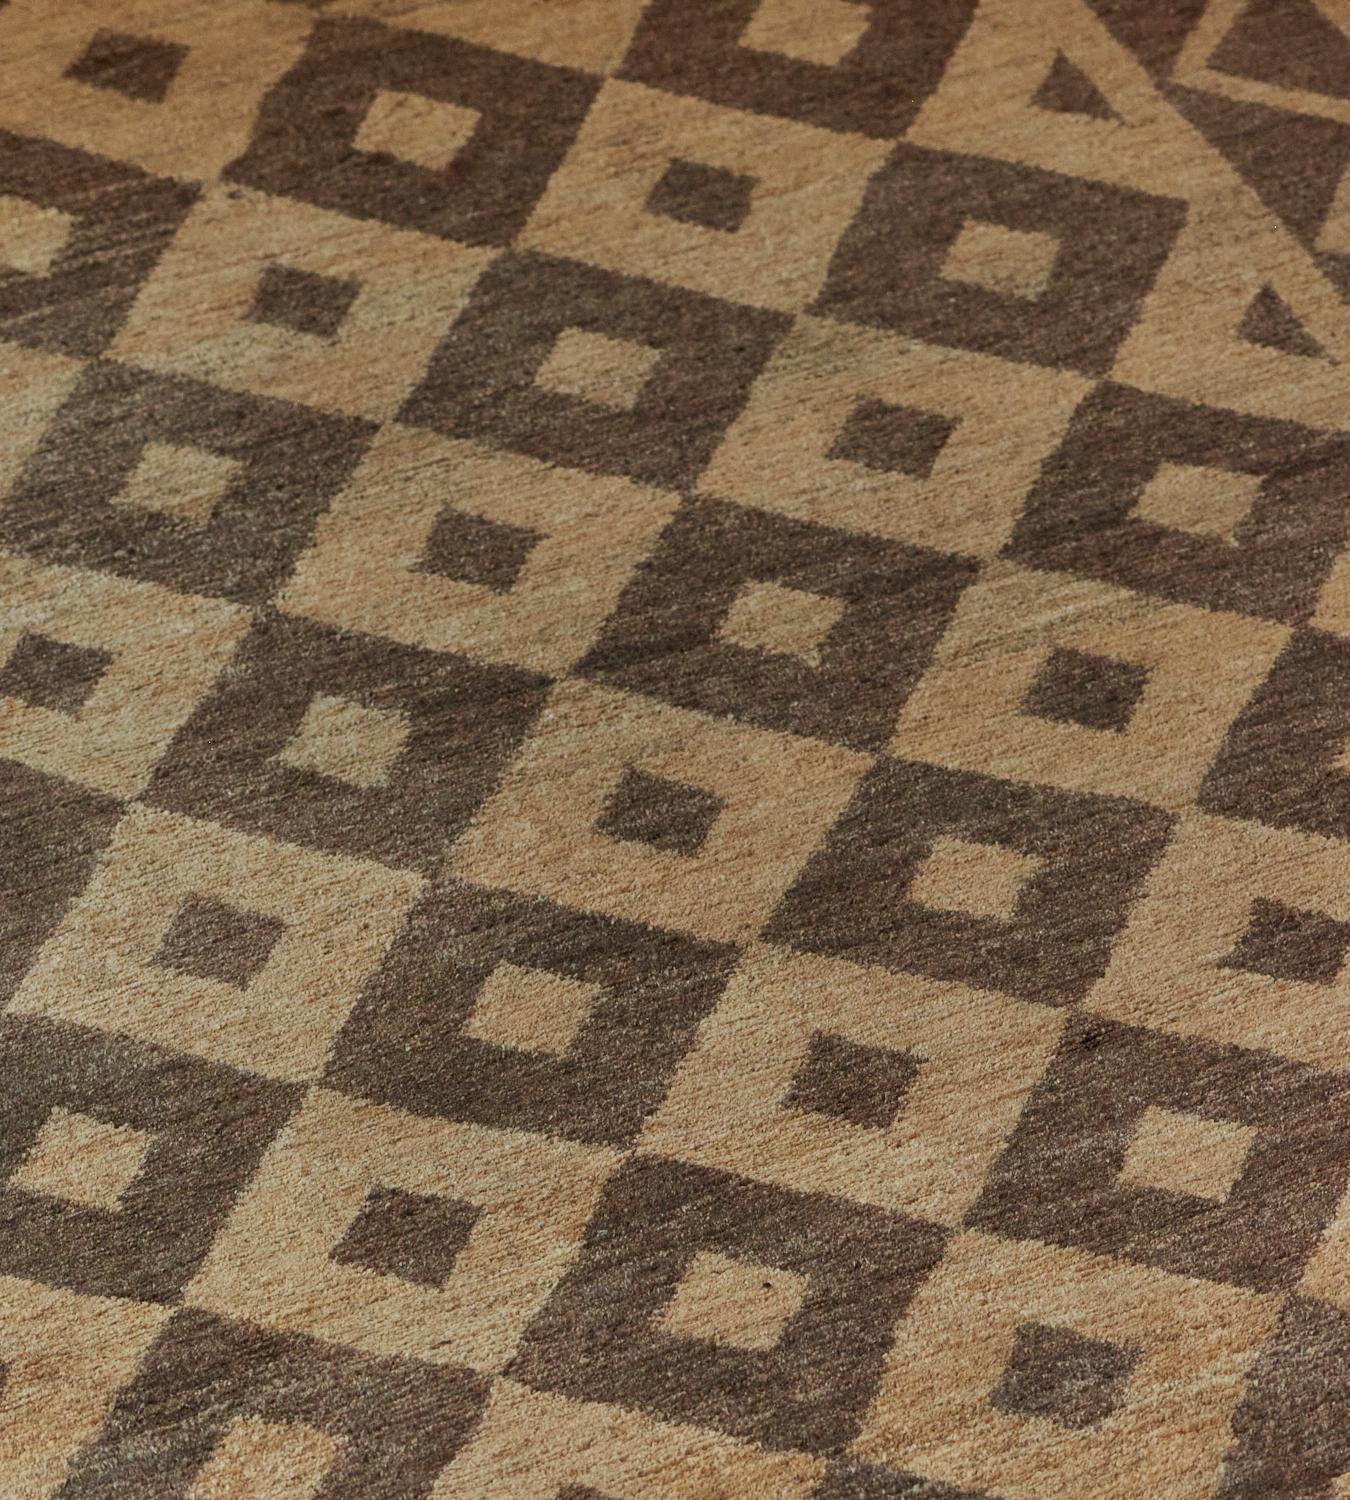 Handwoven Checkered Hemp Rug In New Condition For Sale In West Hollywood, CA